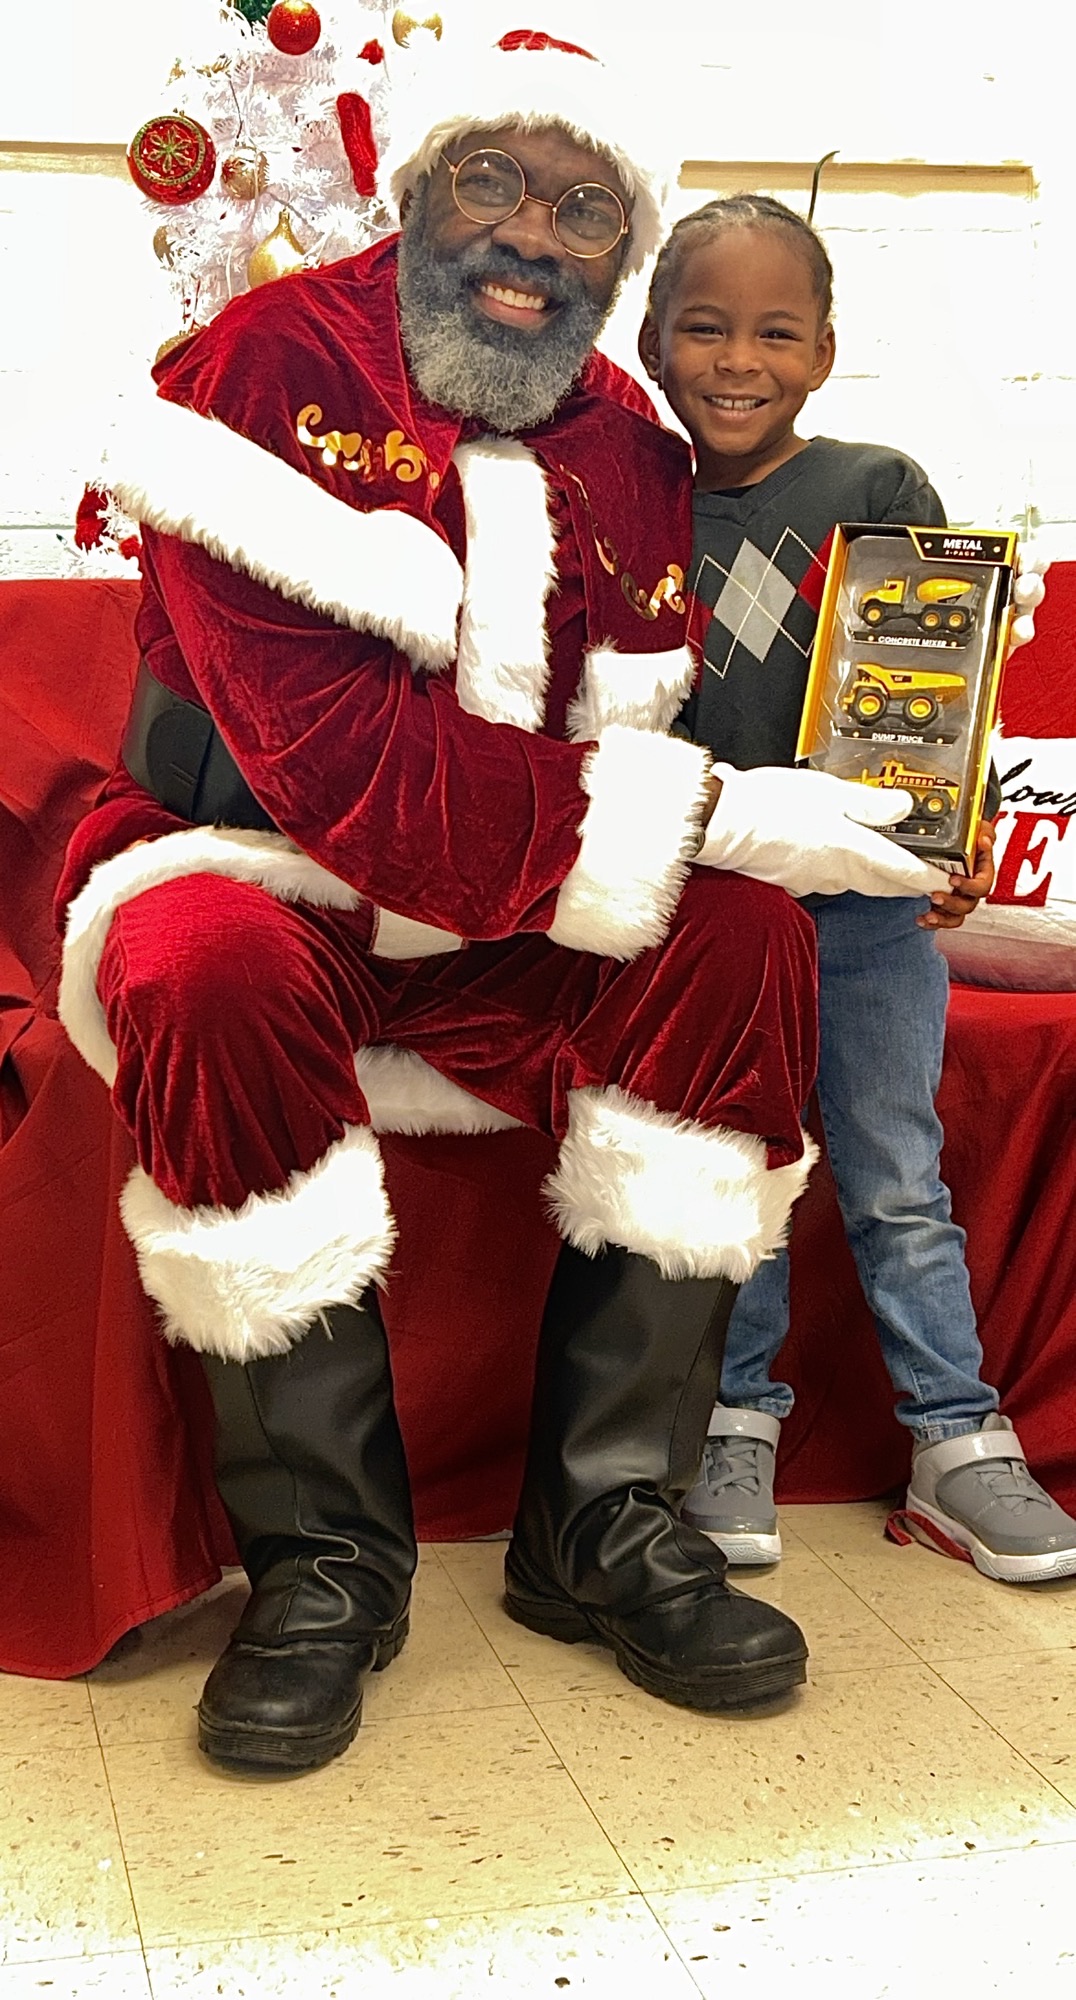 santa gifting a set of toy trucks to a young boy